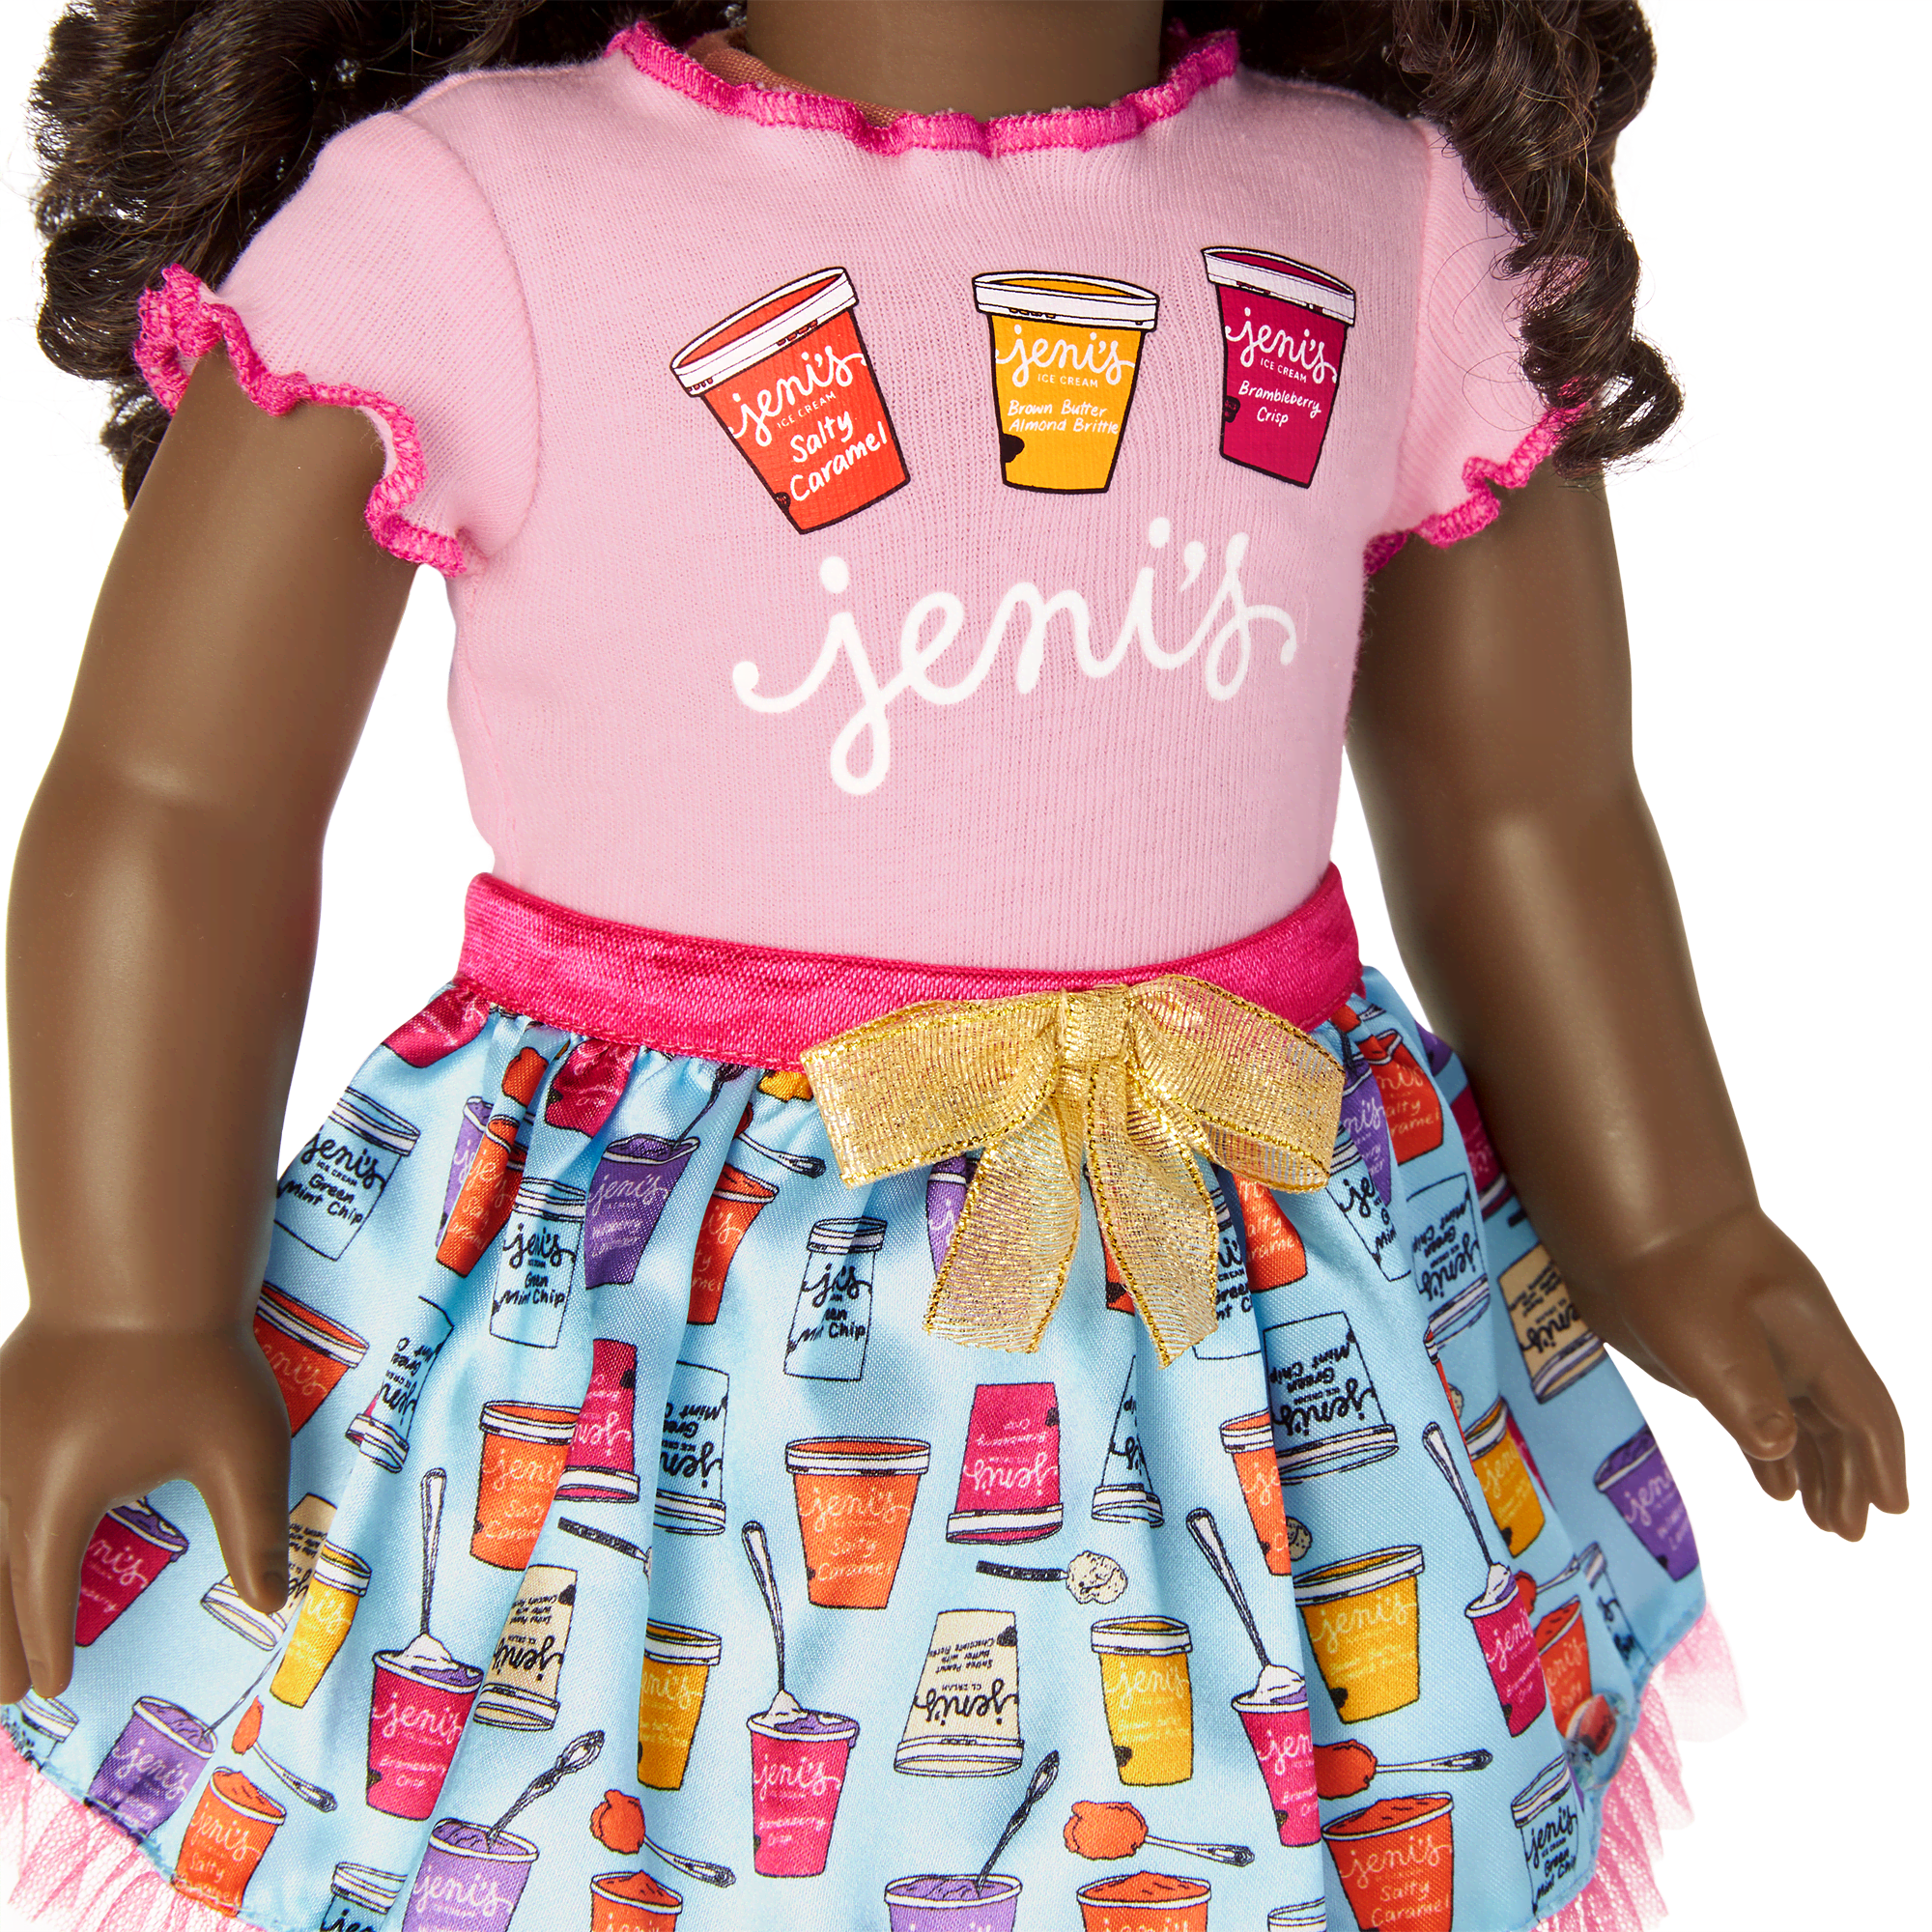 American Girl® x Jeni's Just Add Sprinkles Outfit for 18-inch Dolls